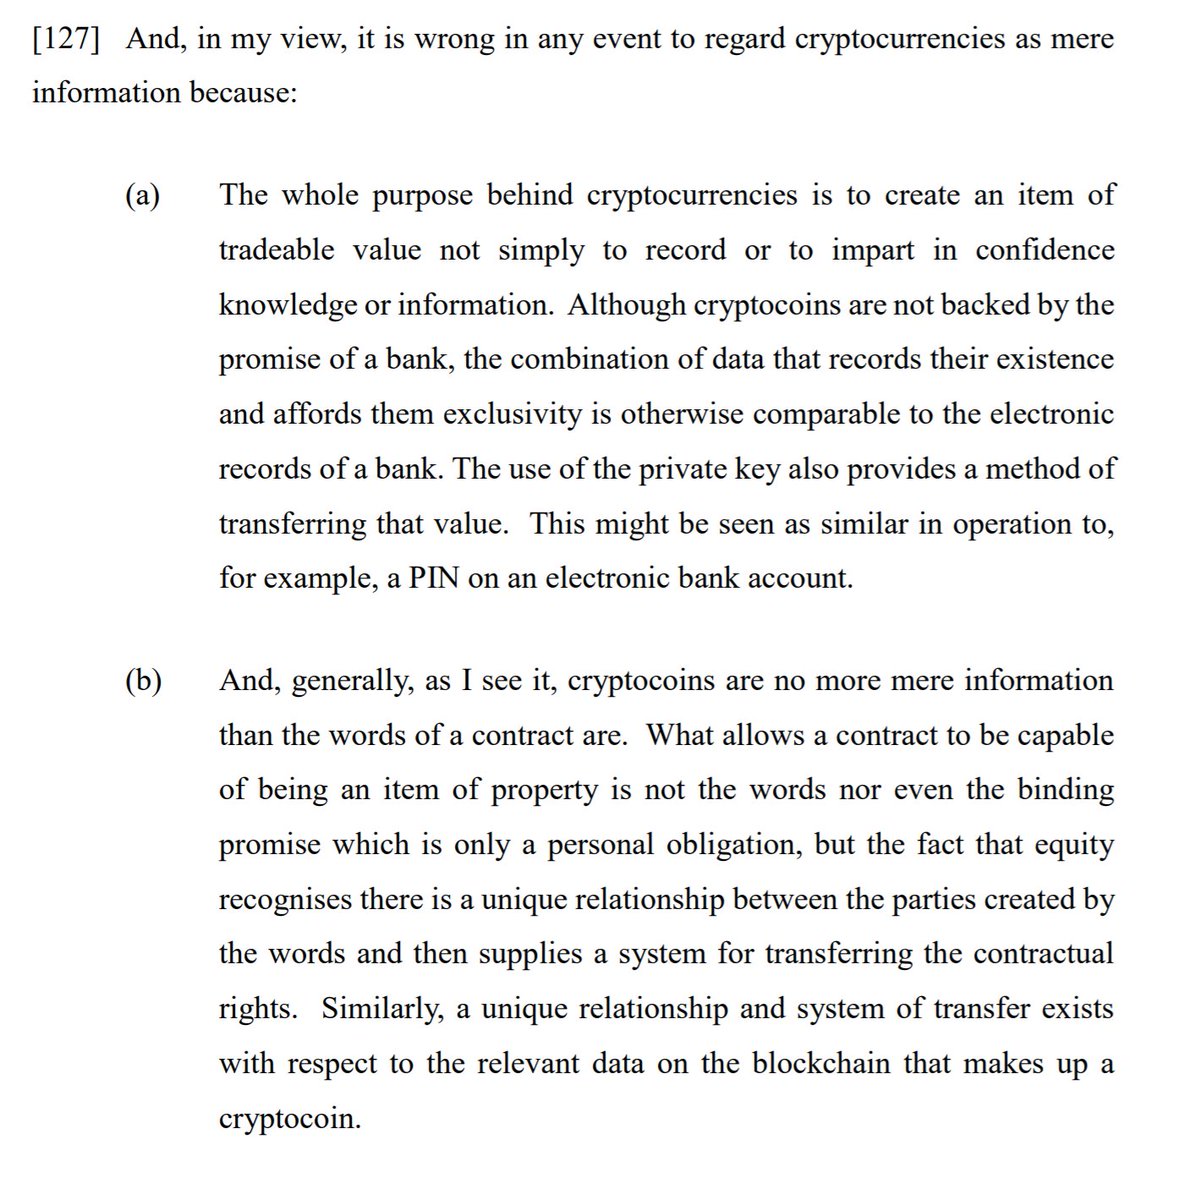 the court analogizes the information involved in cryptocurrency allocation to "the words in a contract"; just as words in a contract being information does not prevent them from determining property rights, so, too, with crypto data